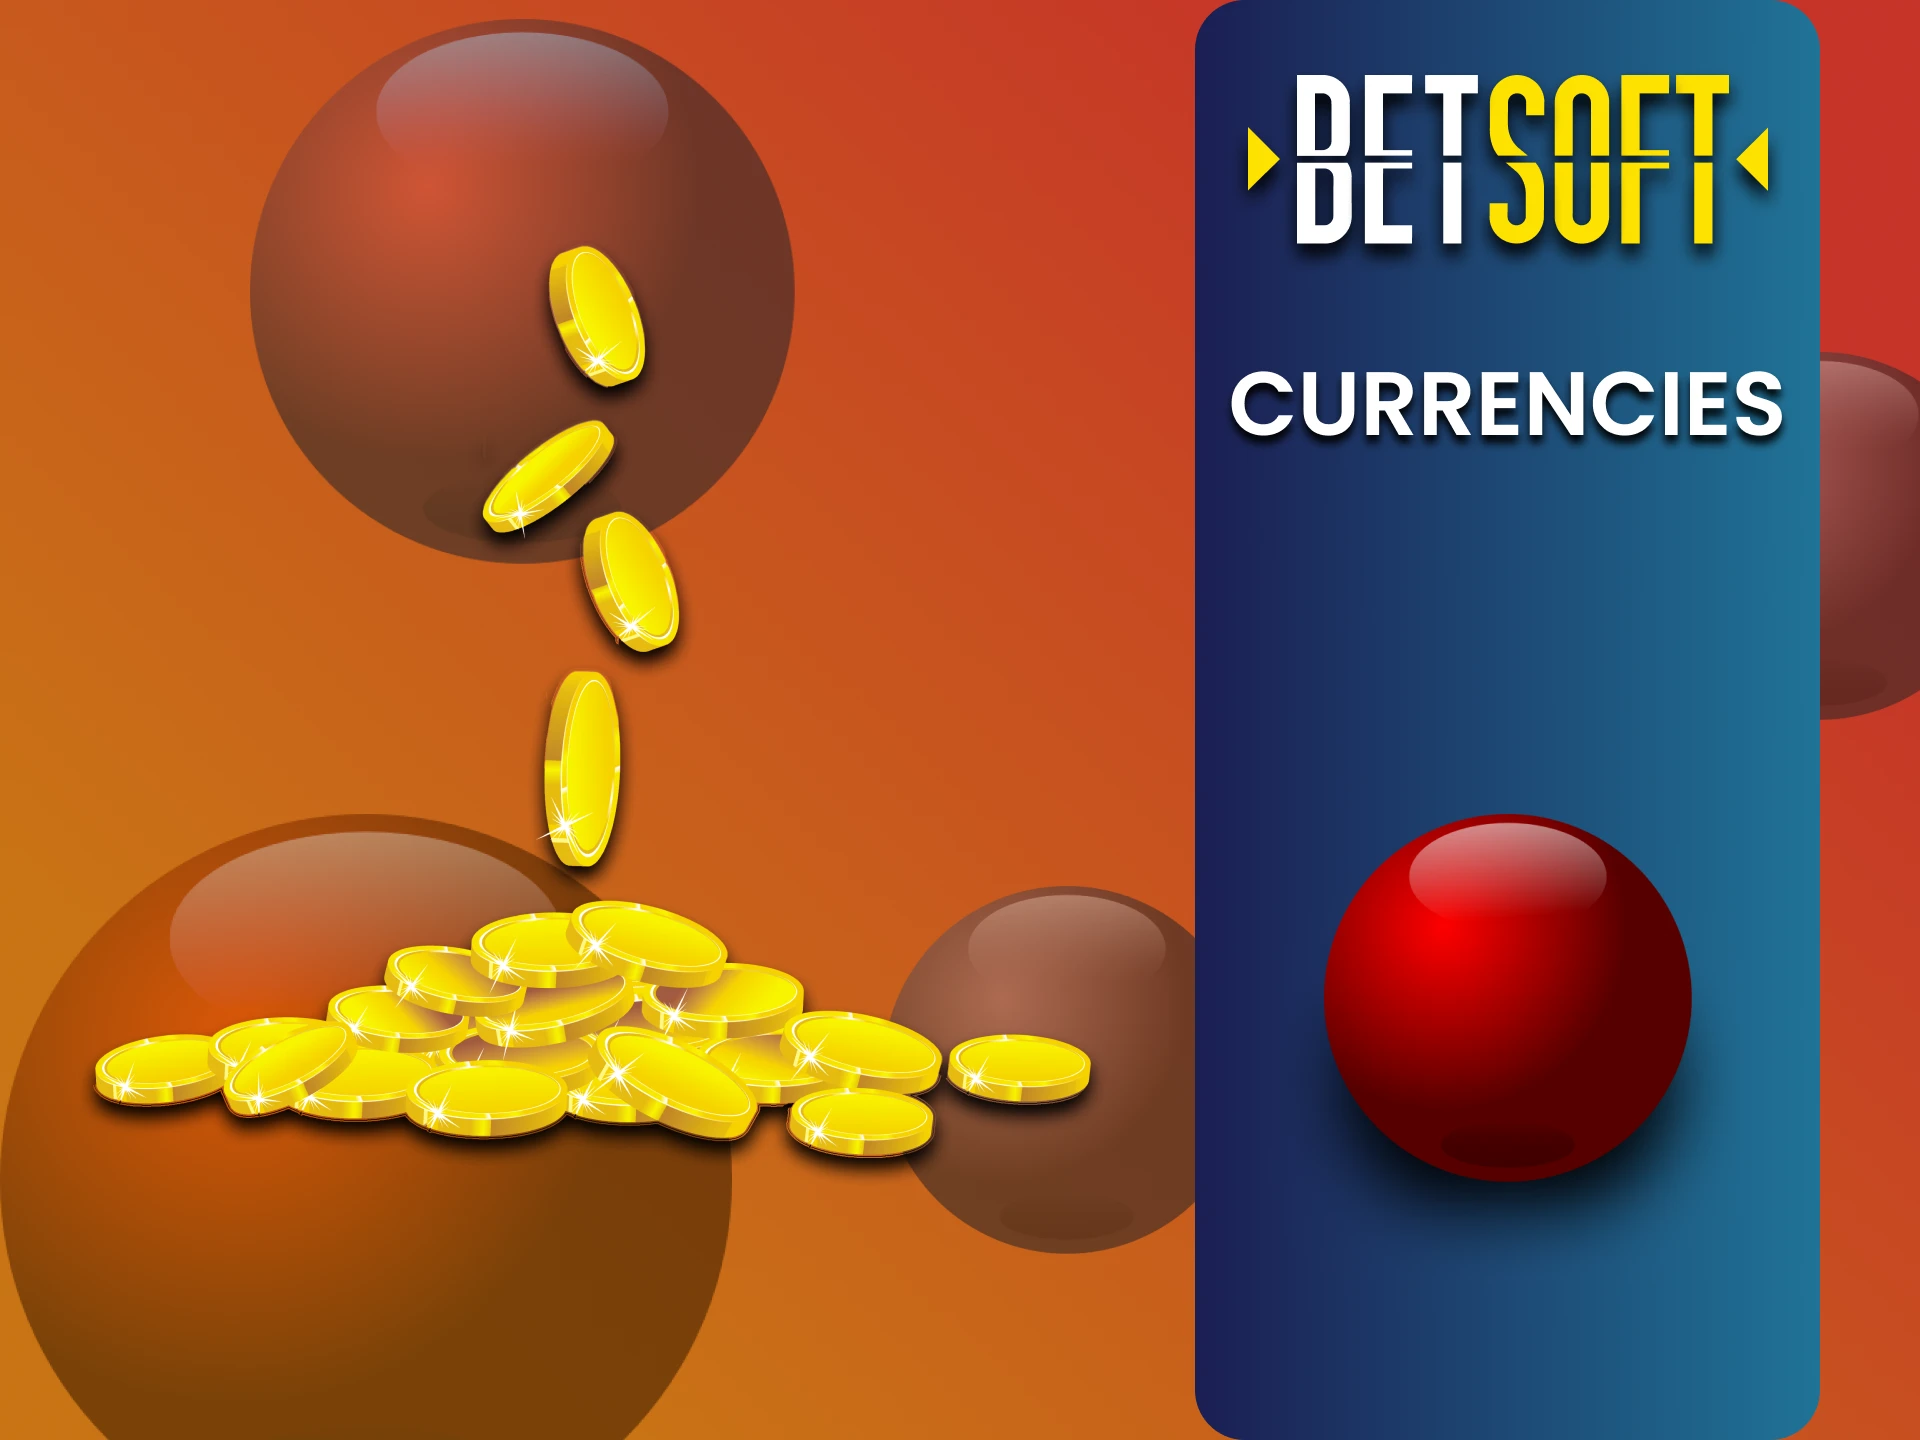 Betsoft games have your currency for playing.